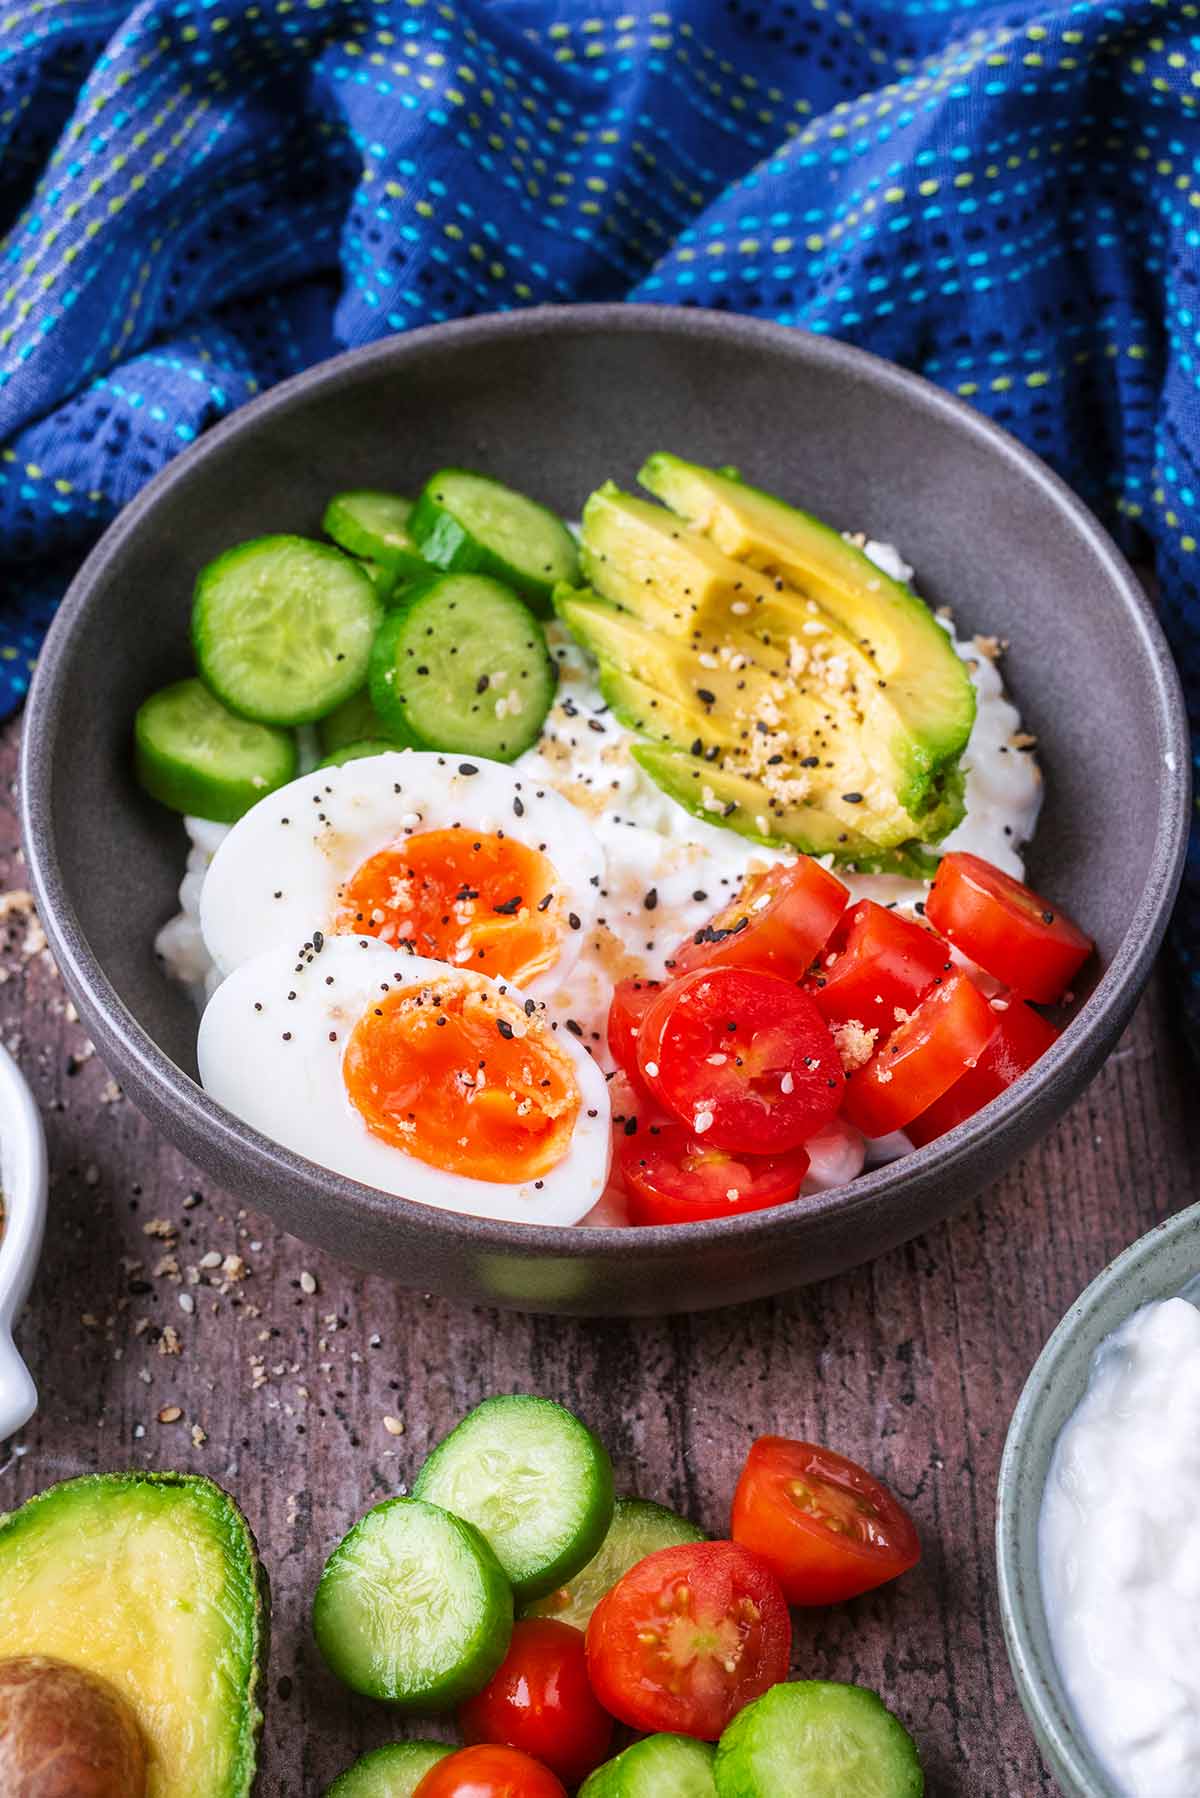 Cottage cheese, egg and salad in front of a blue towel.